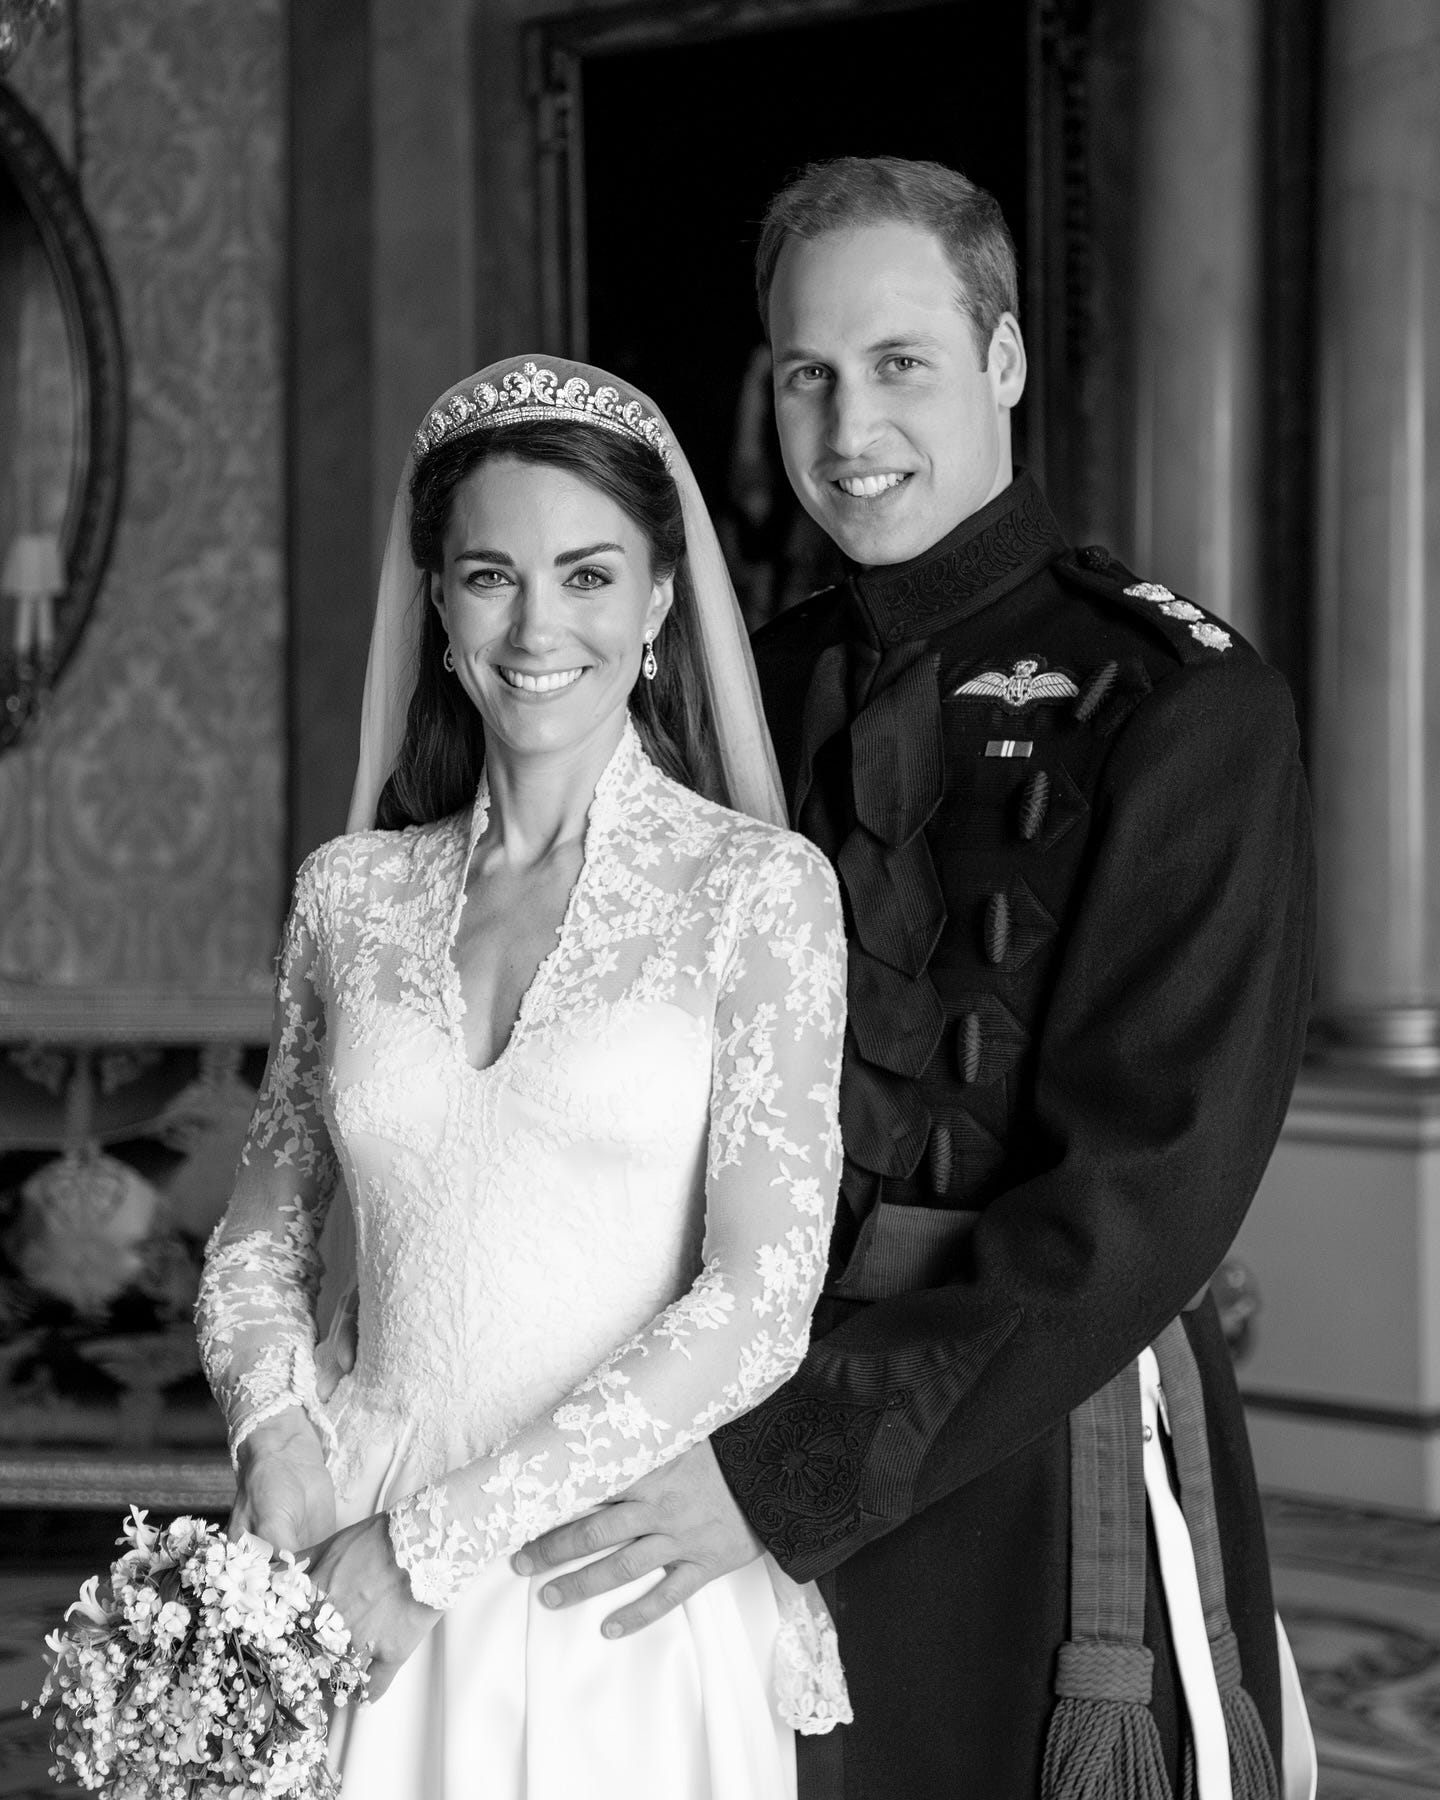 kate middleton and prince william in previously unseen photo on wedding day